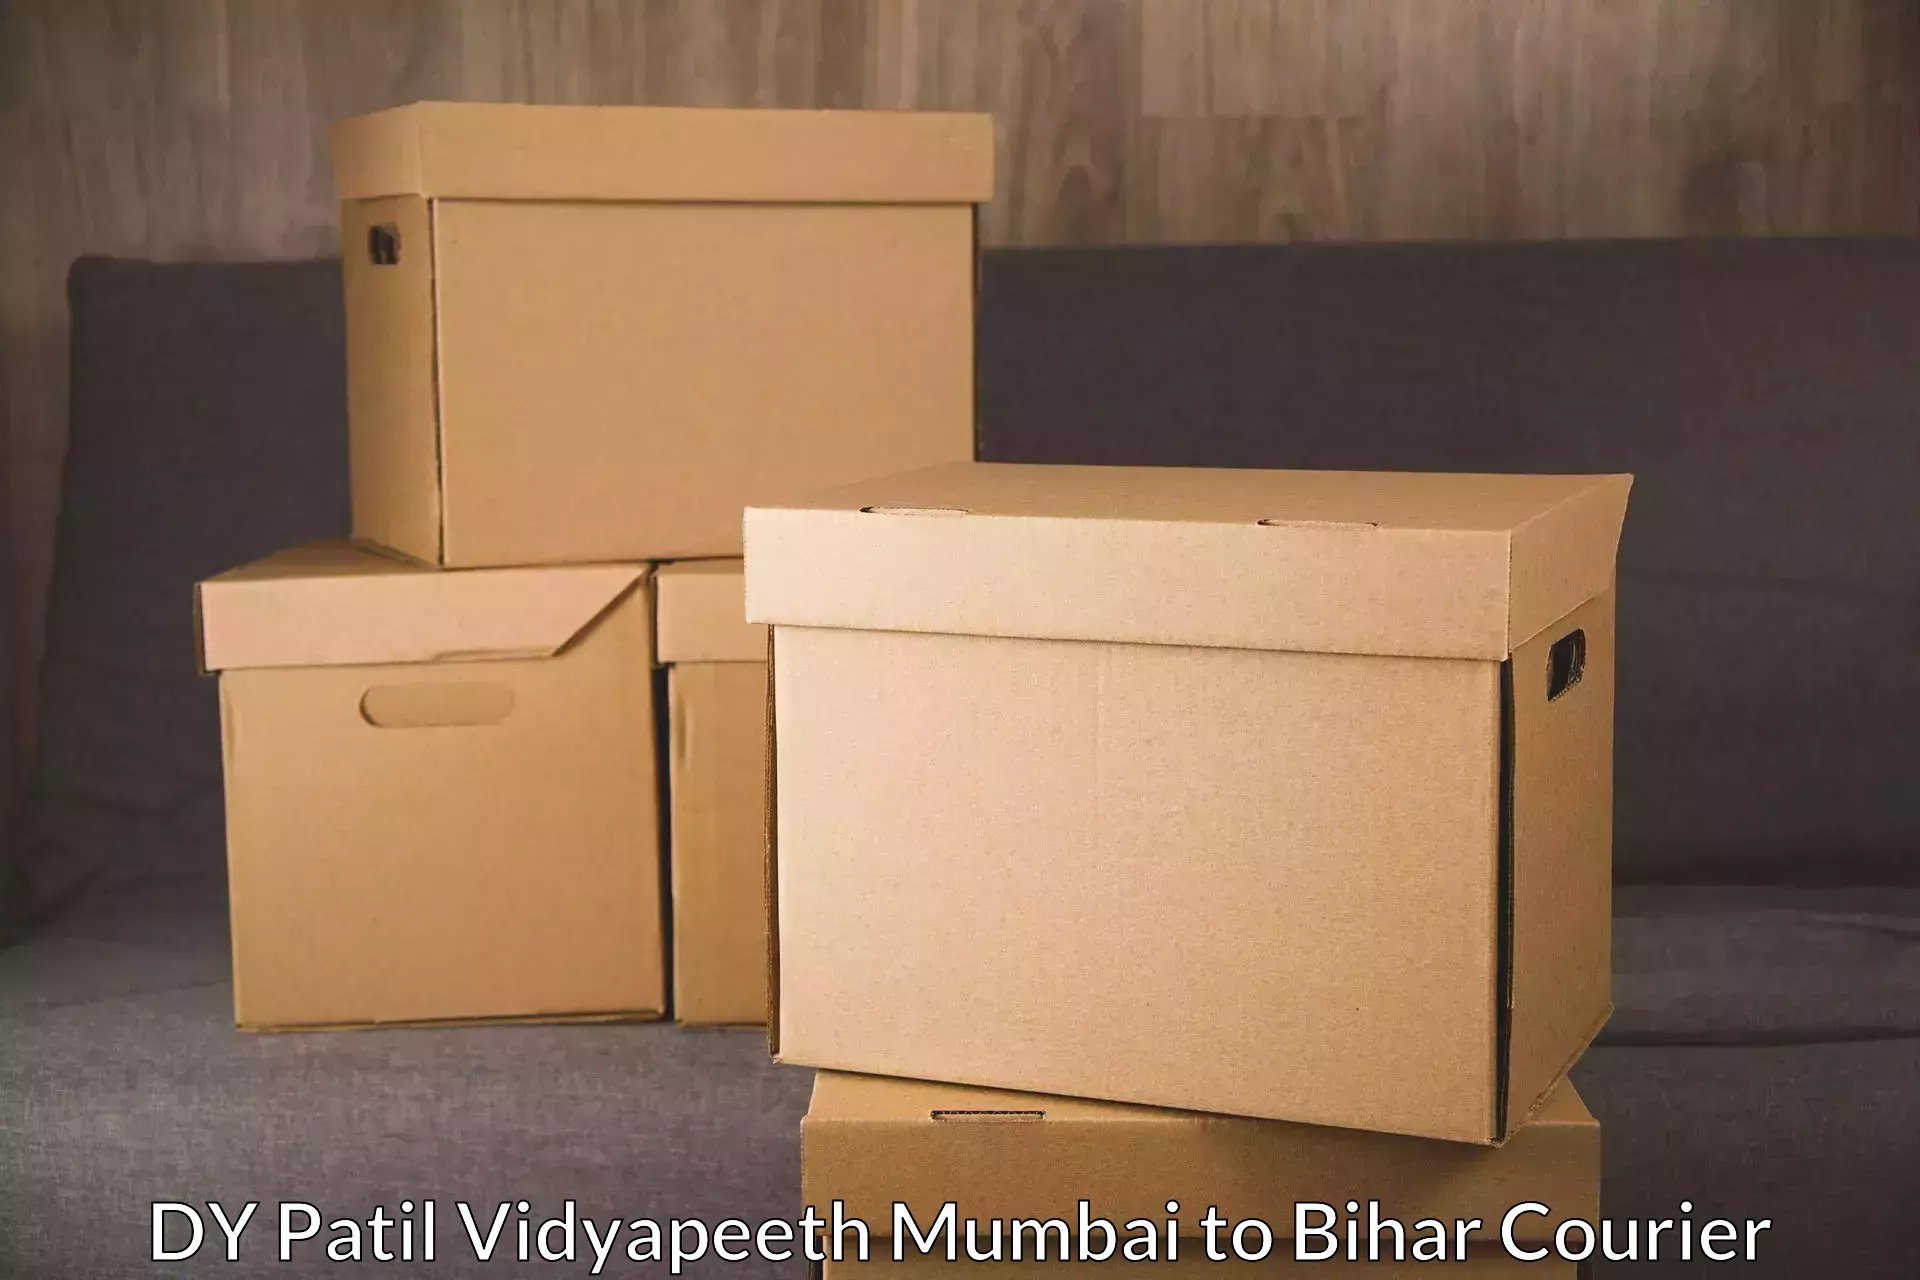 Cash on delivery service DY Patil Vidyapeeth Mumbai to Makhdumpur